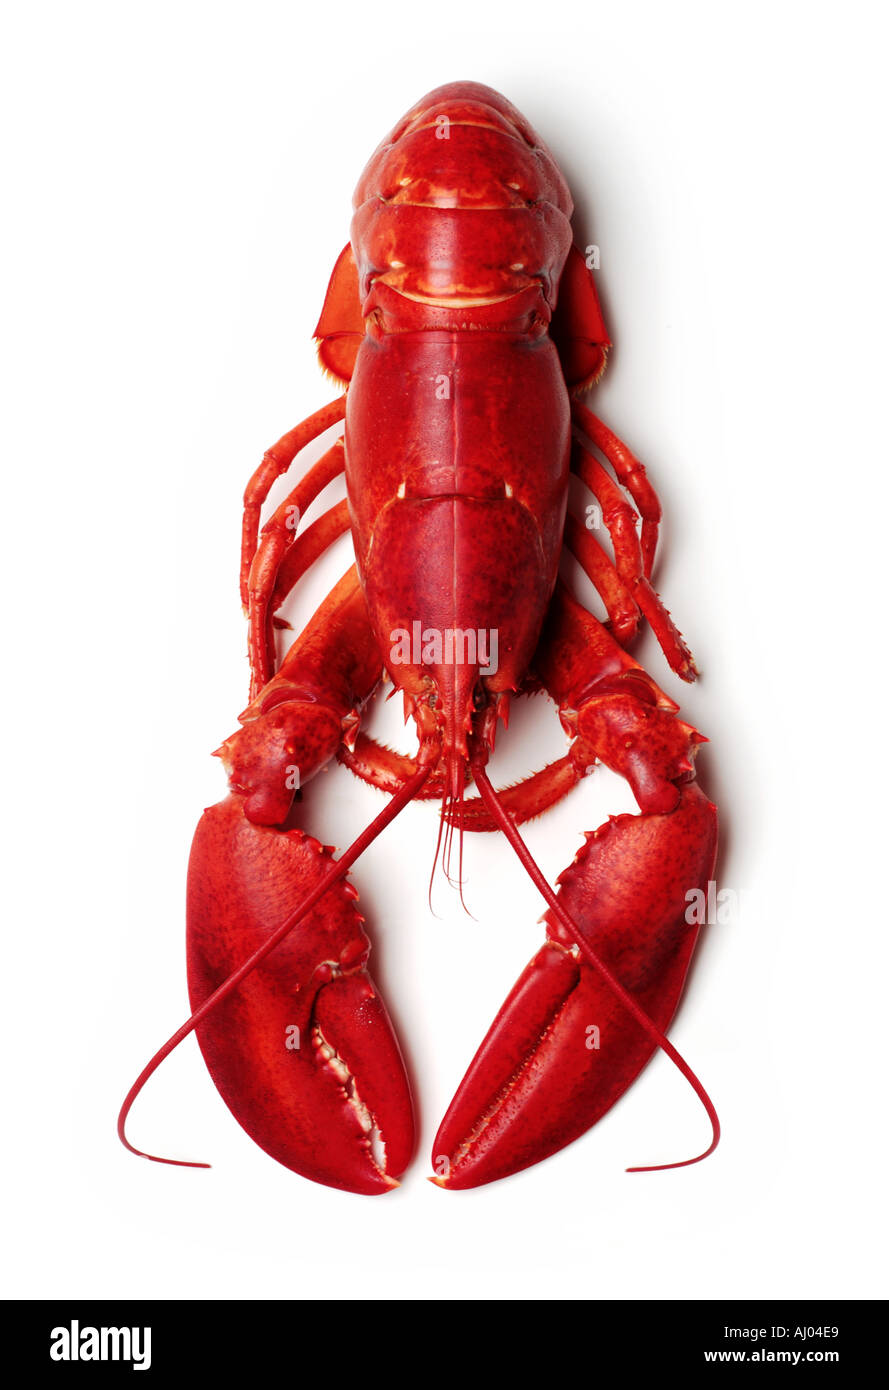 Cooked Lobster on White Background Stock Photo